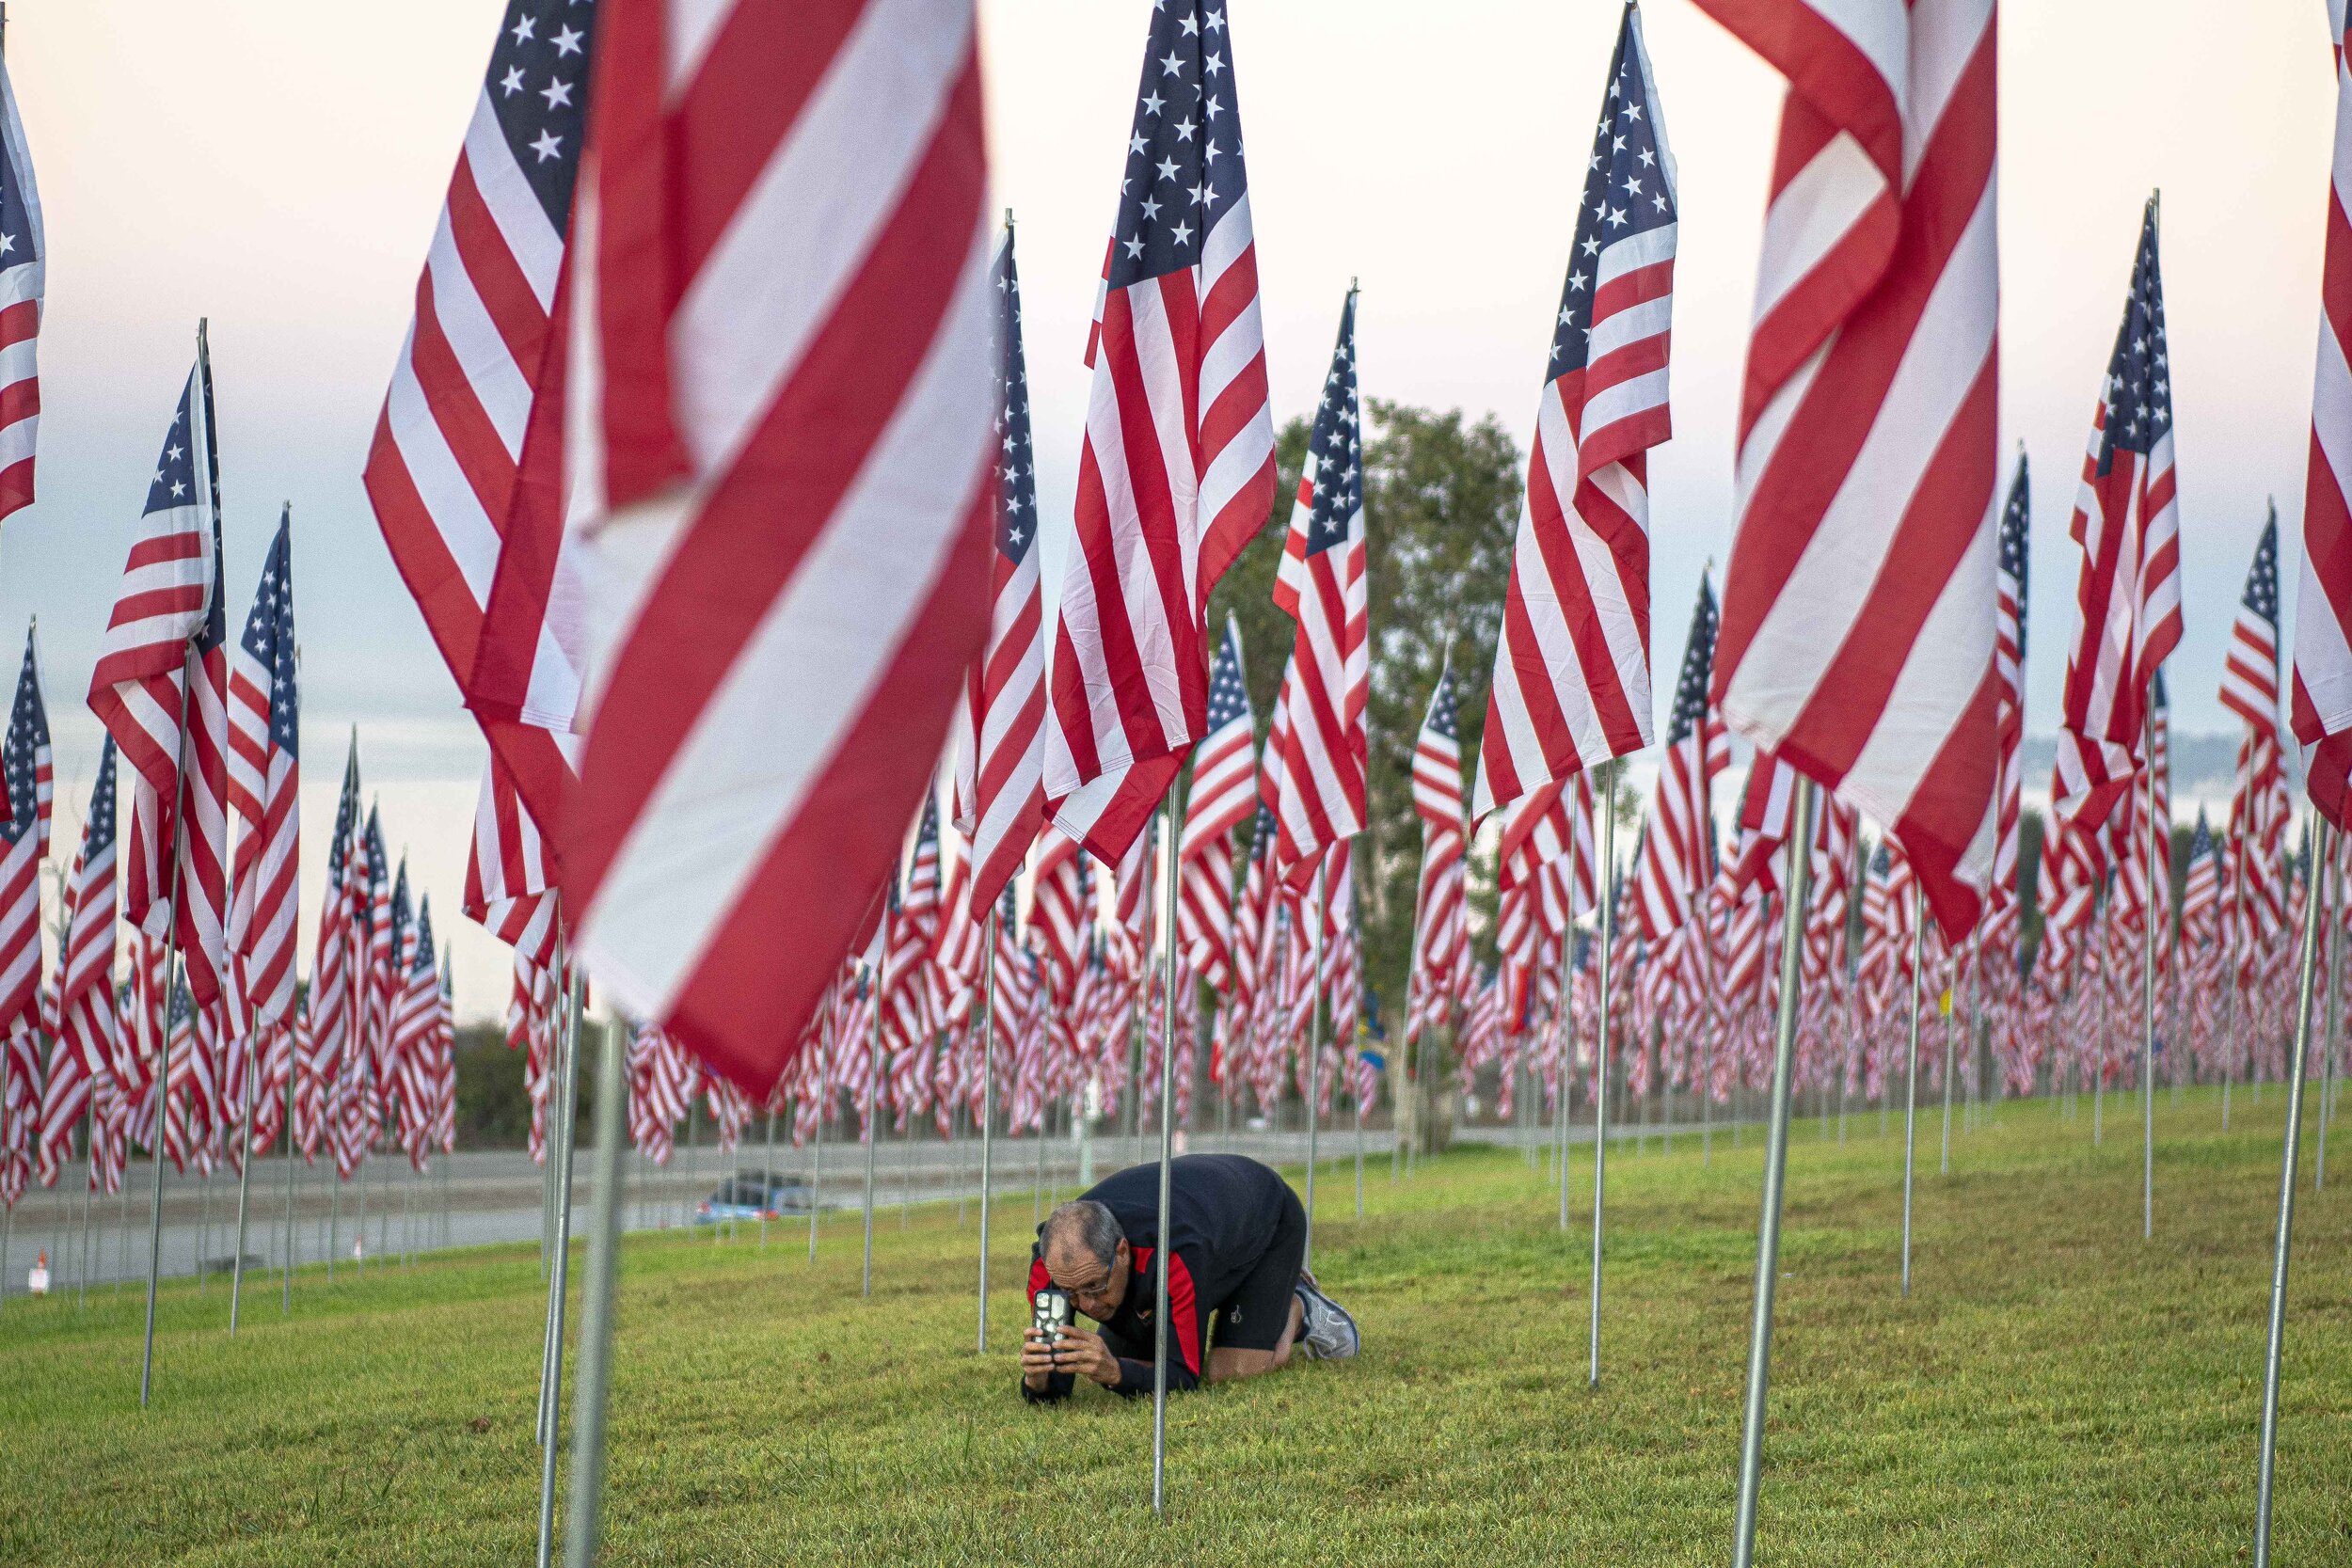  An onlooker takes a picture among the Waves of Flags diplay at Pepperdine University on September 11, 2021, in Malibu, Calif. (Jon Putman | The Corsair) 